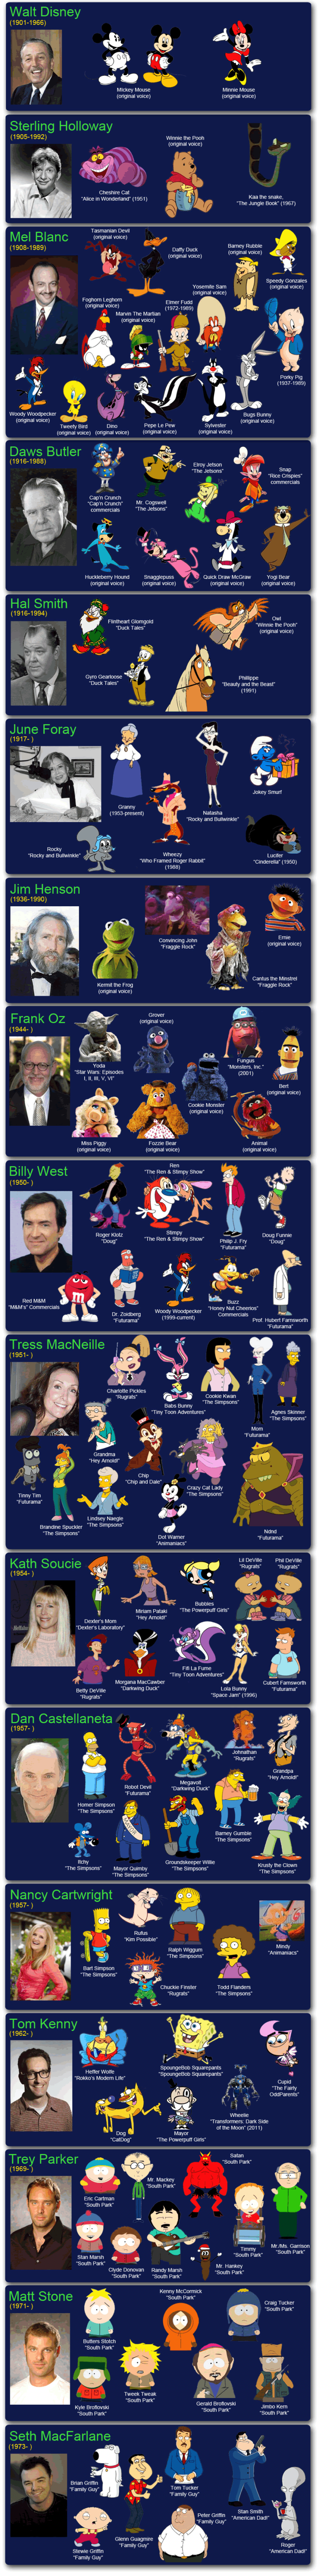 Visual : The faces behind the voices - Infographic.tv - Number one ...